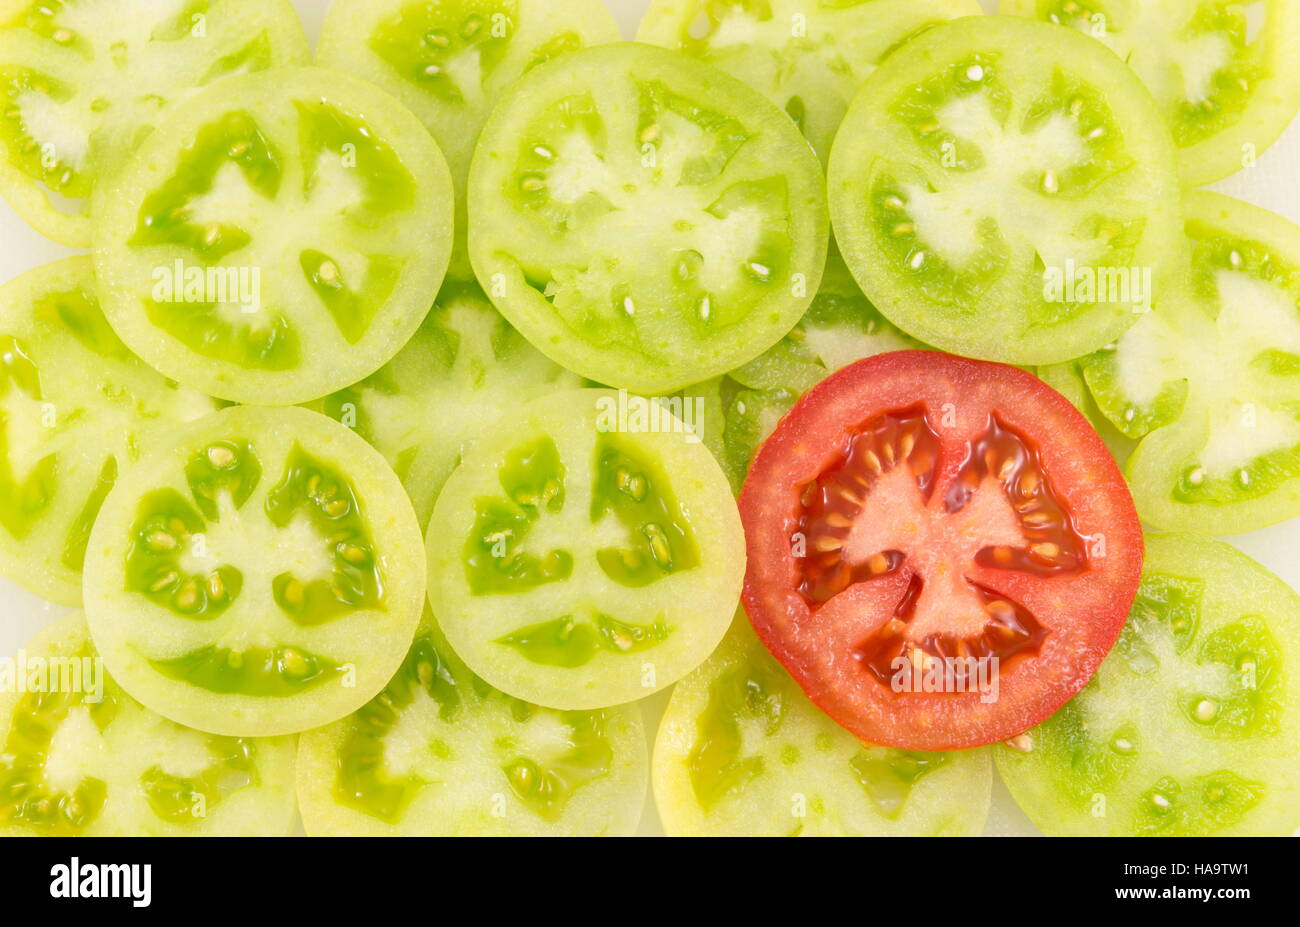 green tomatoes sliced into circles and arranged together next to a red tomato slice Stock Photo